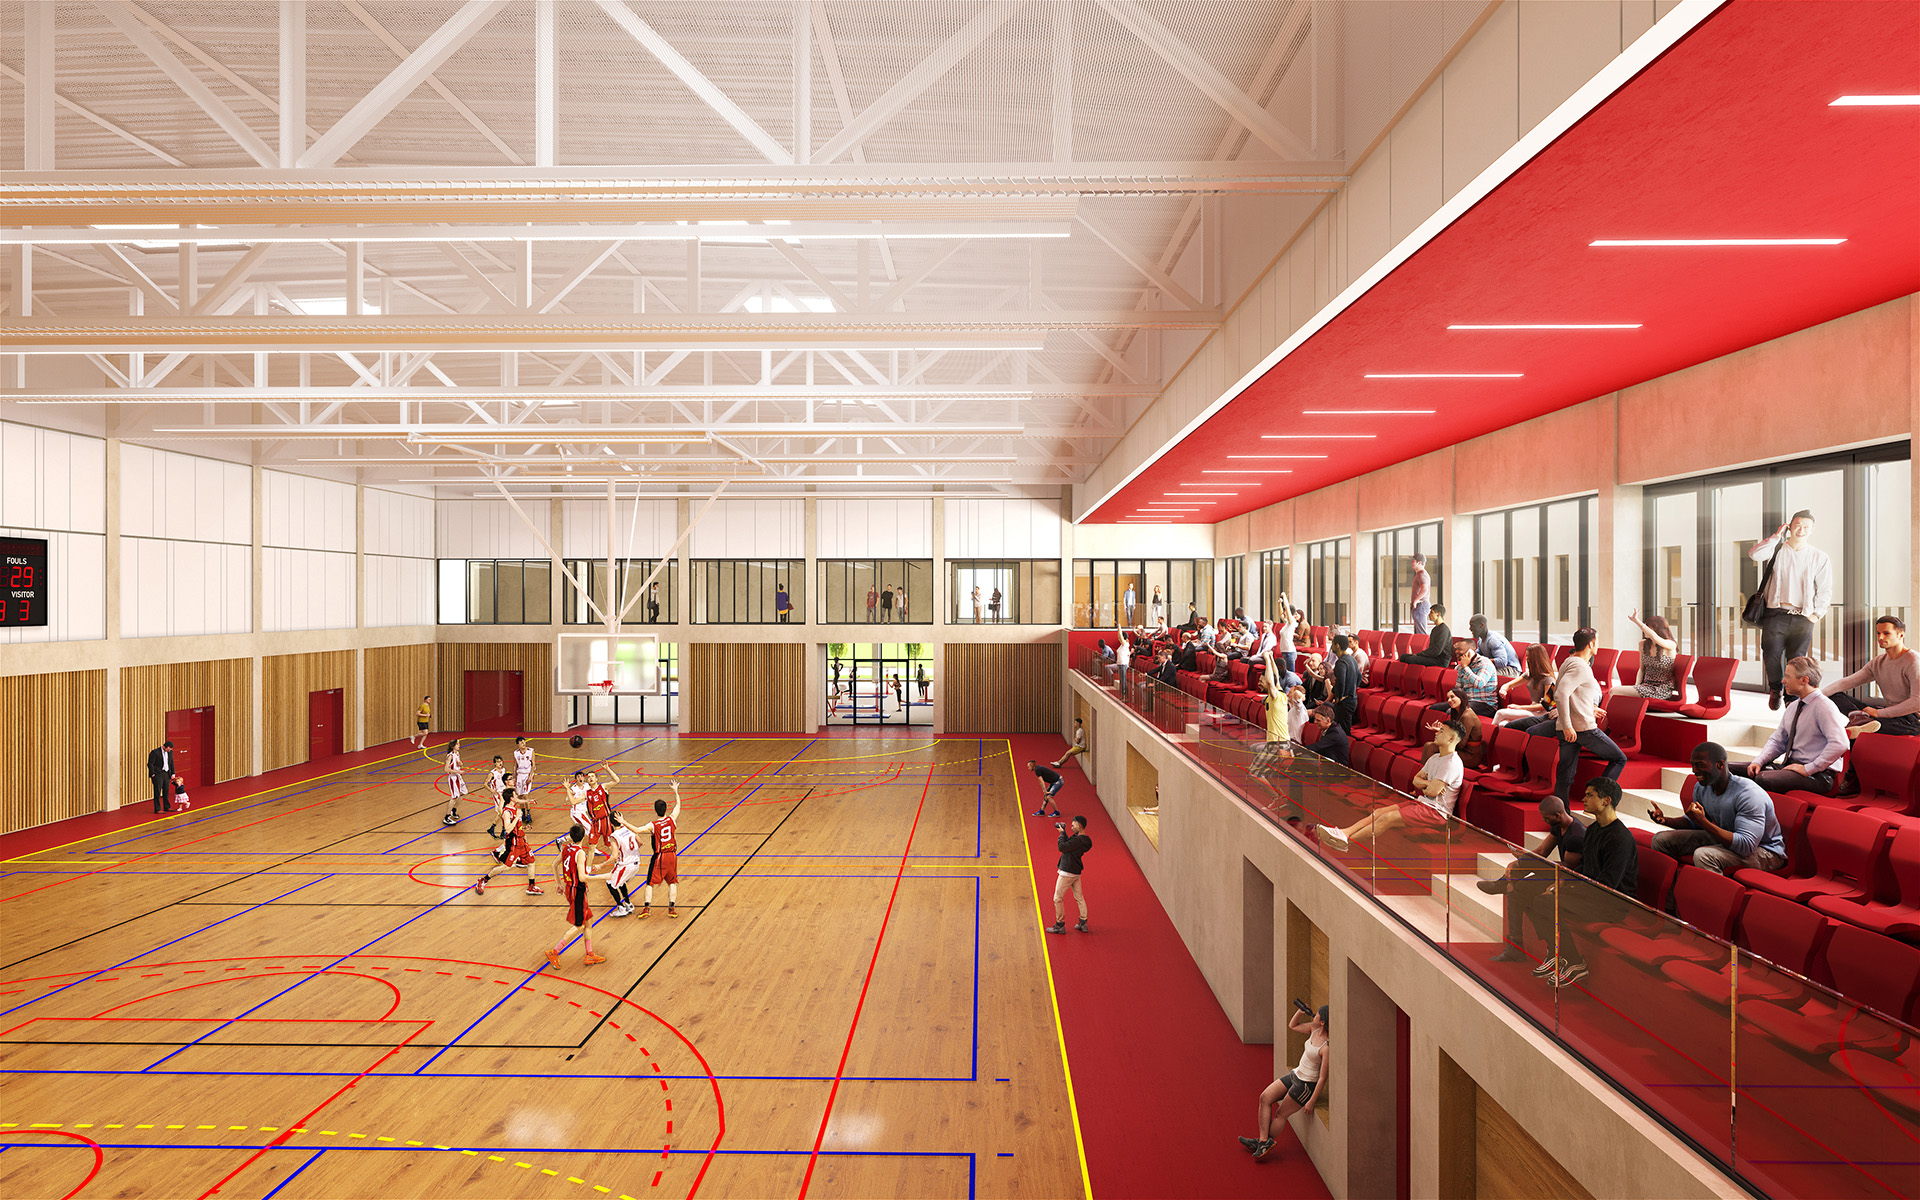 3D image of a gymnasium in which a basketball game is taking place